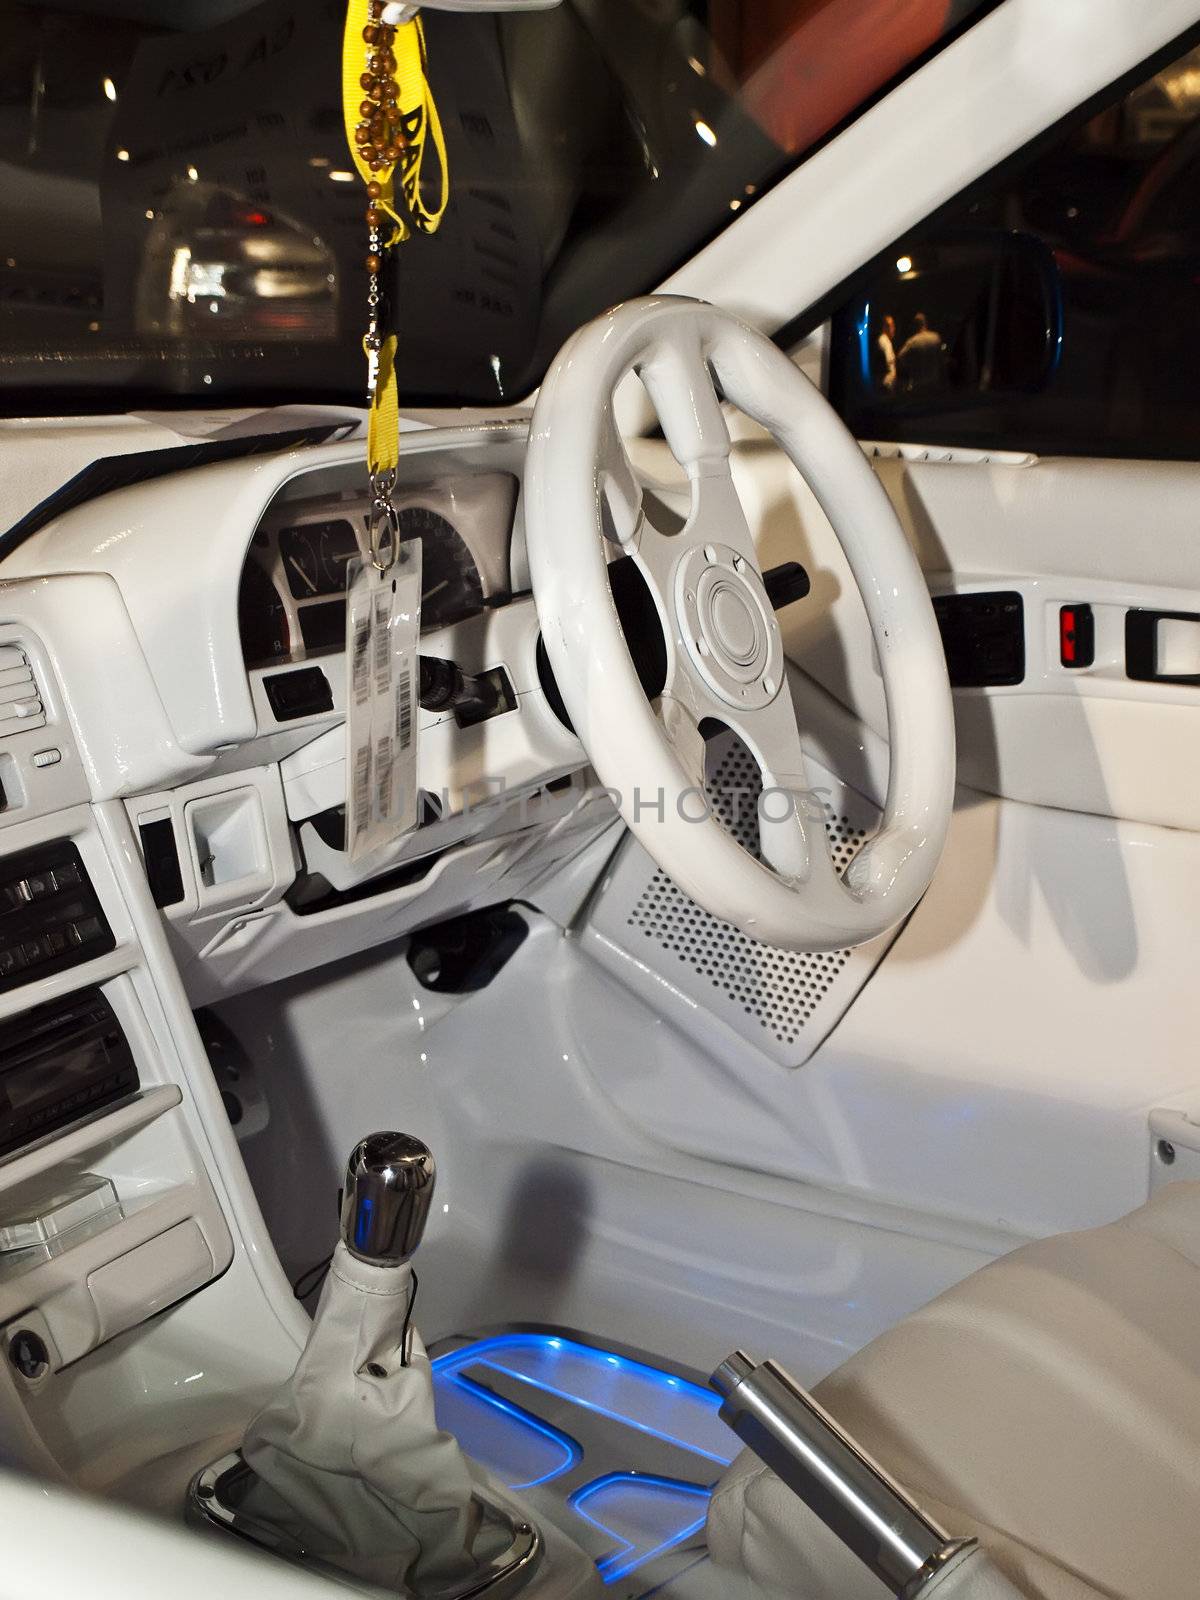 Interior of a modified car during a carshow in Malta